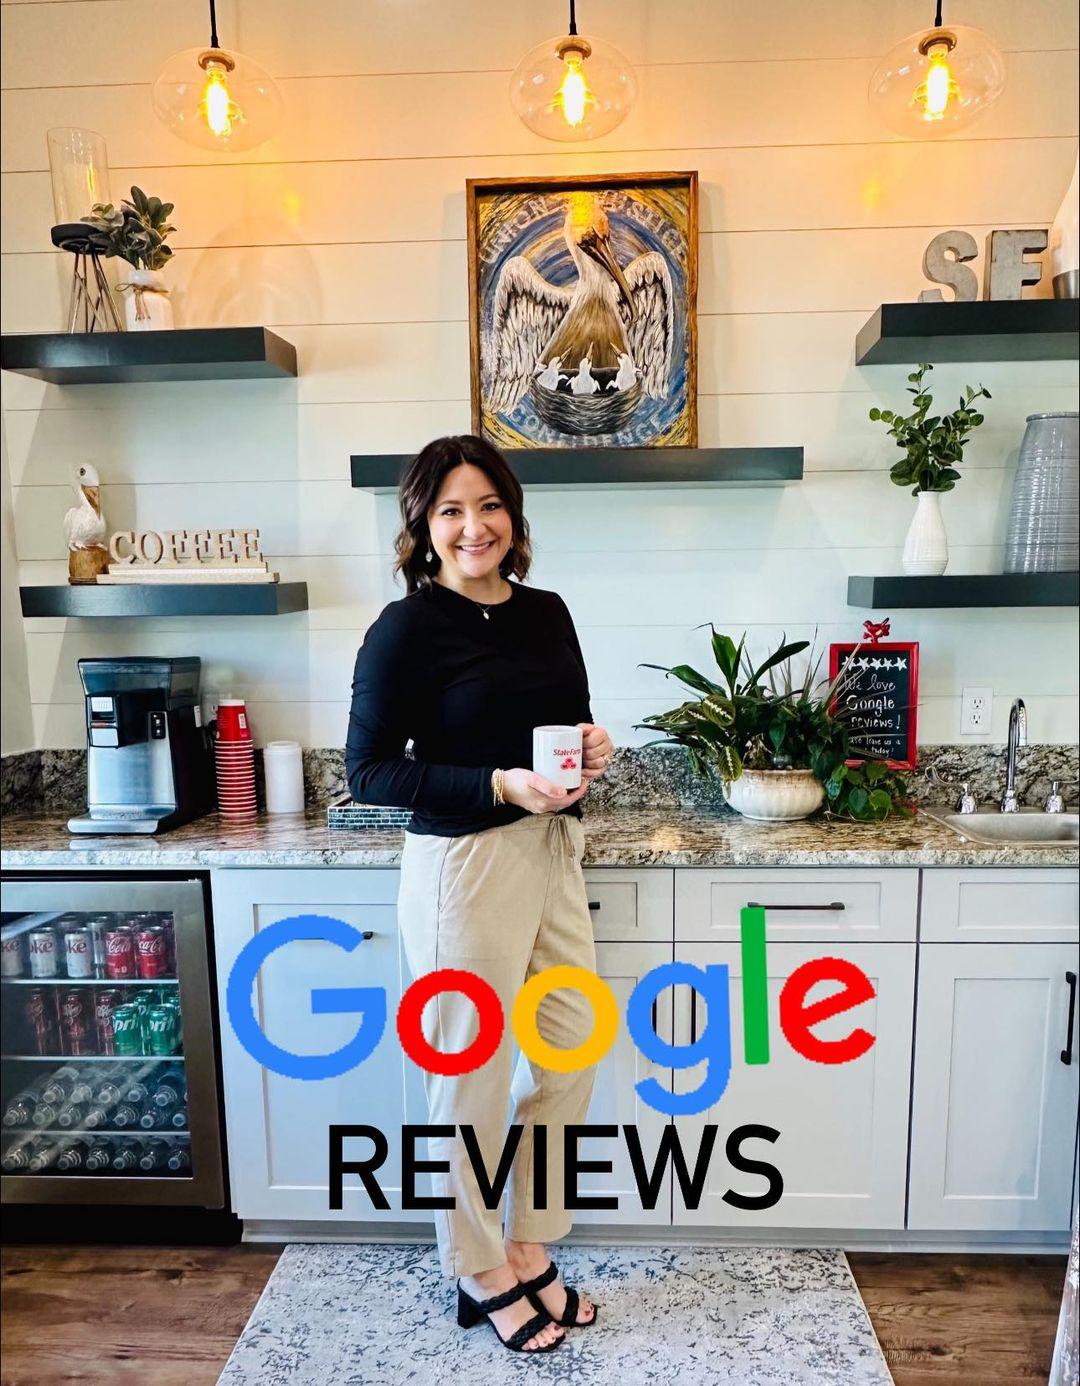 Will you help us reach our goal of 200 Google reviews? We appreciate you!!! Jennifer Mabou - State Farm Insurance Agent Sulphur (337)527-0027